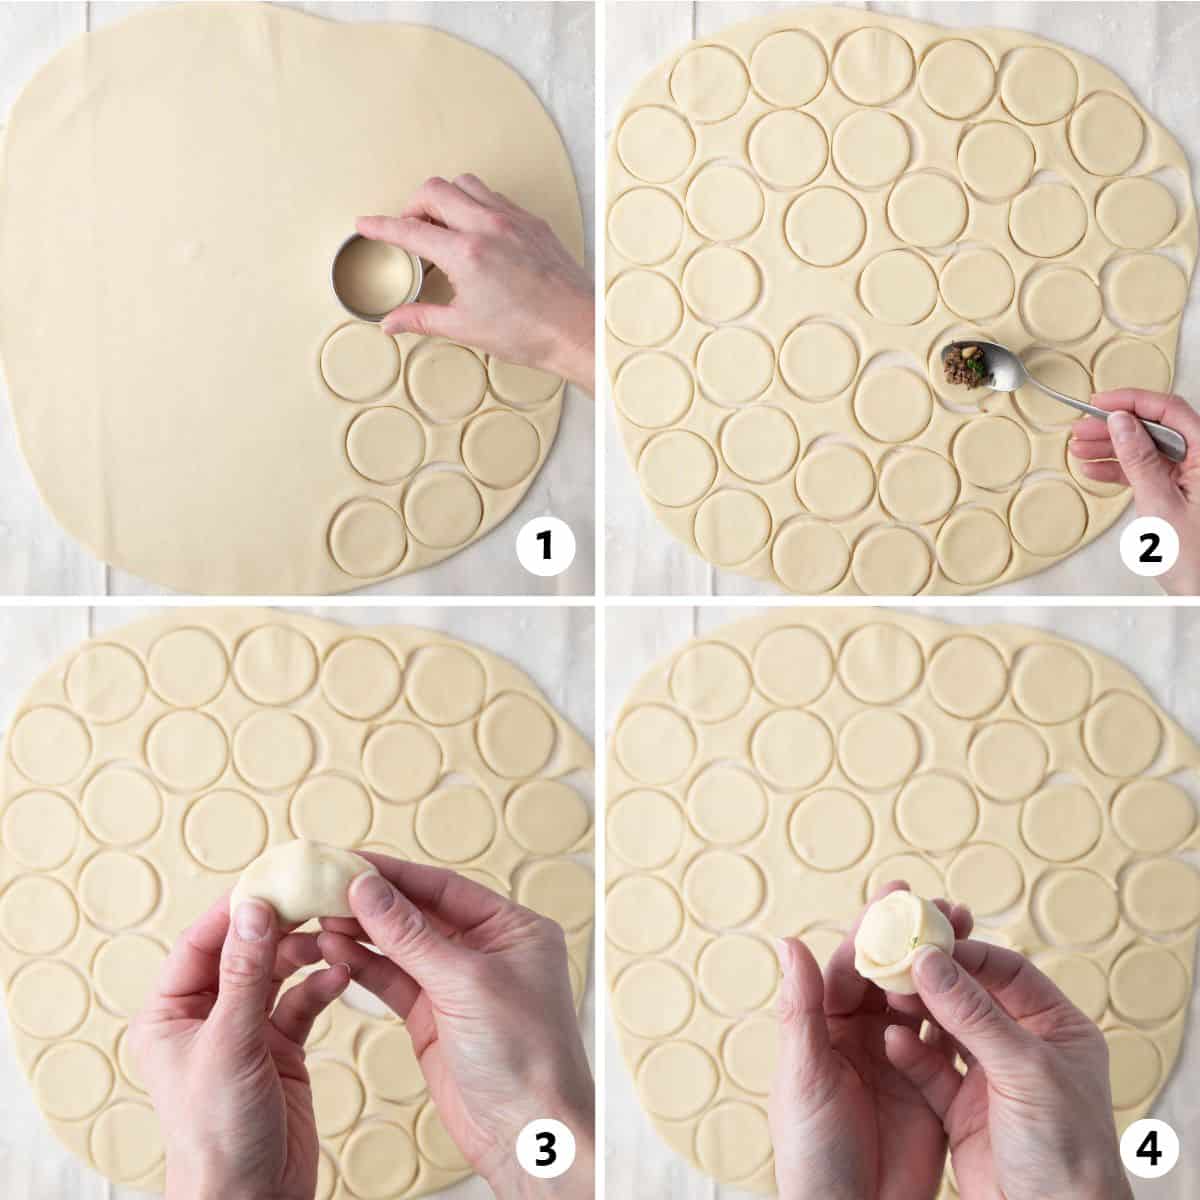 4 image making dumpling: 1- dough rolled out with a cookie cutter pressing into it with a few already cut, 2- spoon added beef filling to one of the dumpling shells, 3- hand folding it into a halfmoon, 4- and then pinching to form dumpling.